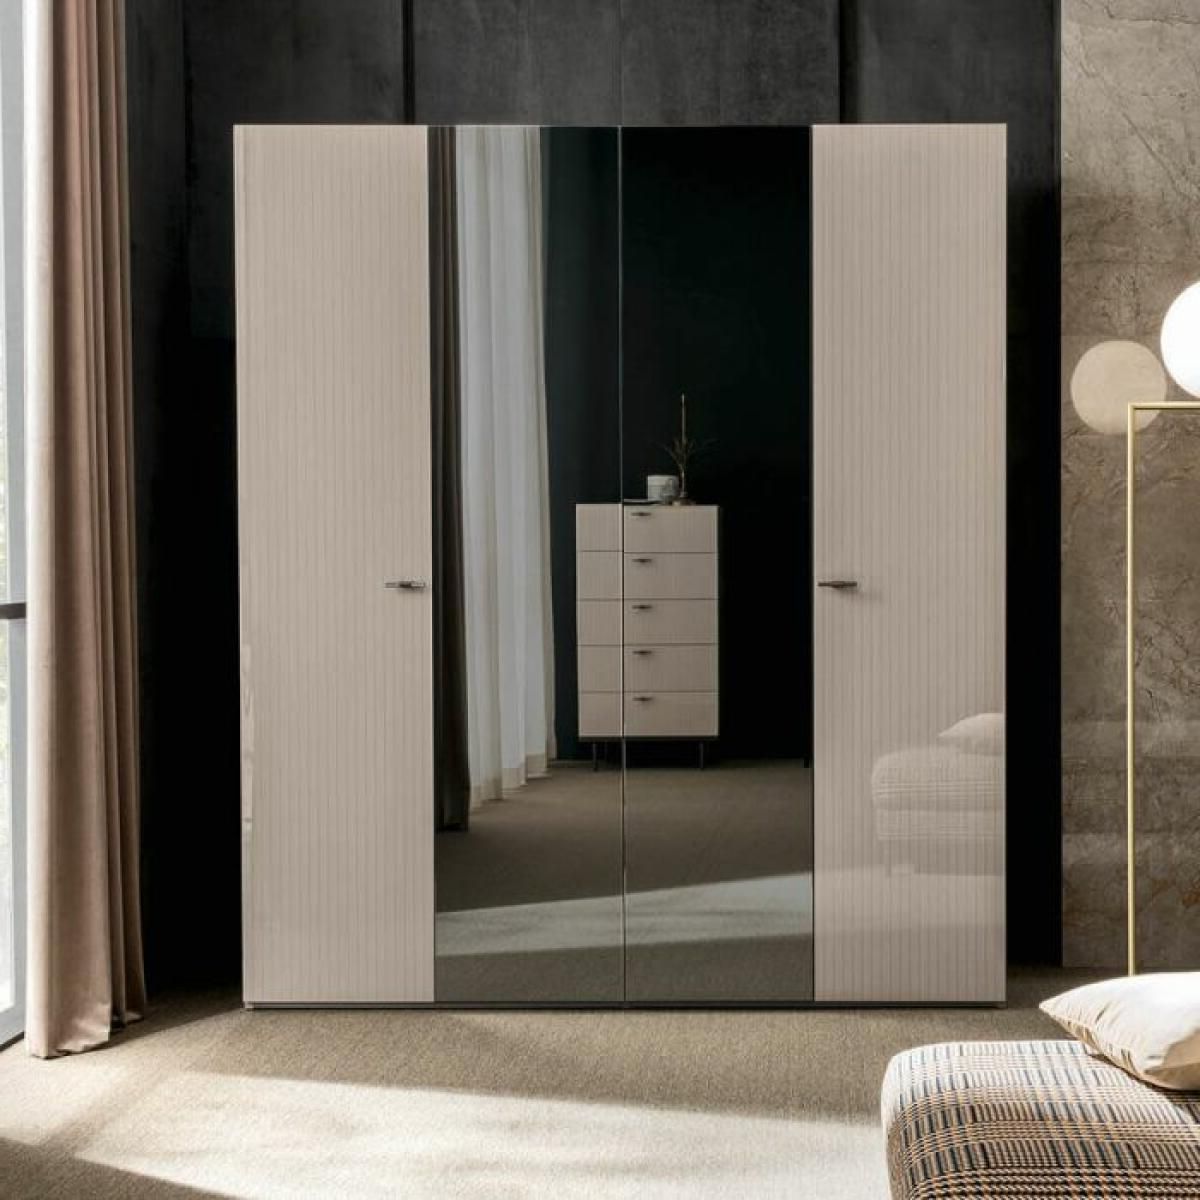 Claire 4 Door High Gloss Mirror Wardrobe – Bova Contemporary Furniture –  Dallas, Texas Modern Furniture Store Throughout High Gloss White Wardrobes (Gallery 13 of 20)